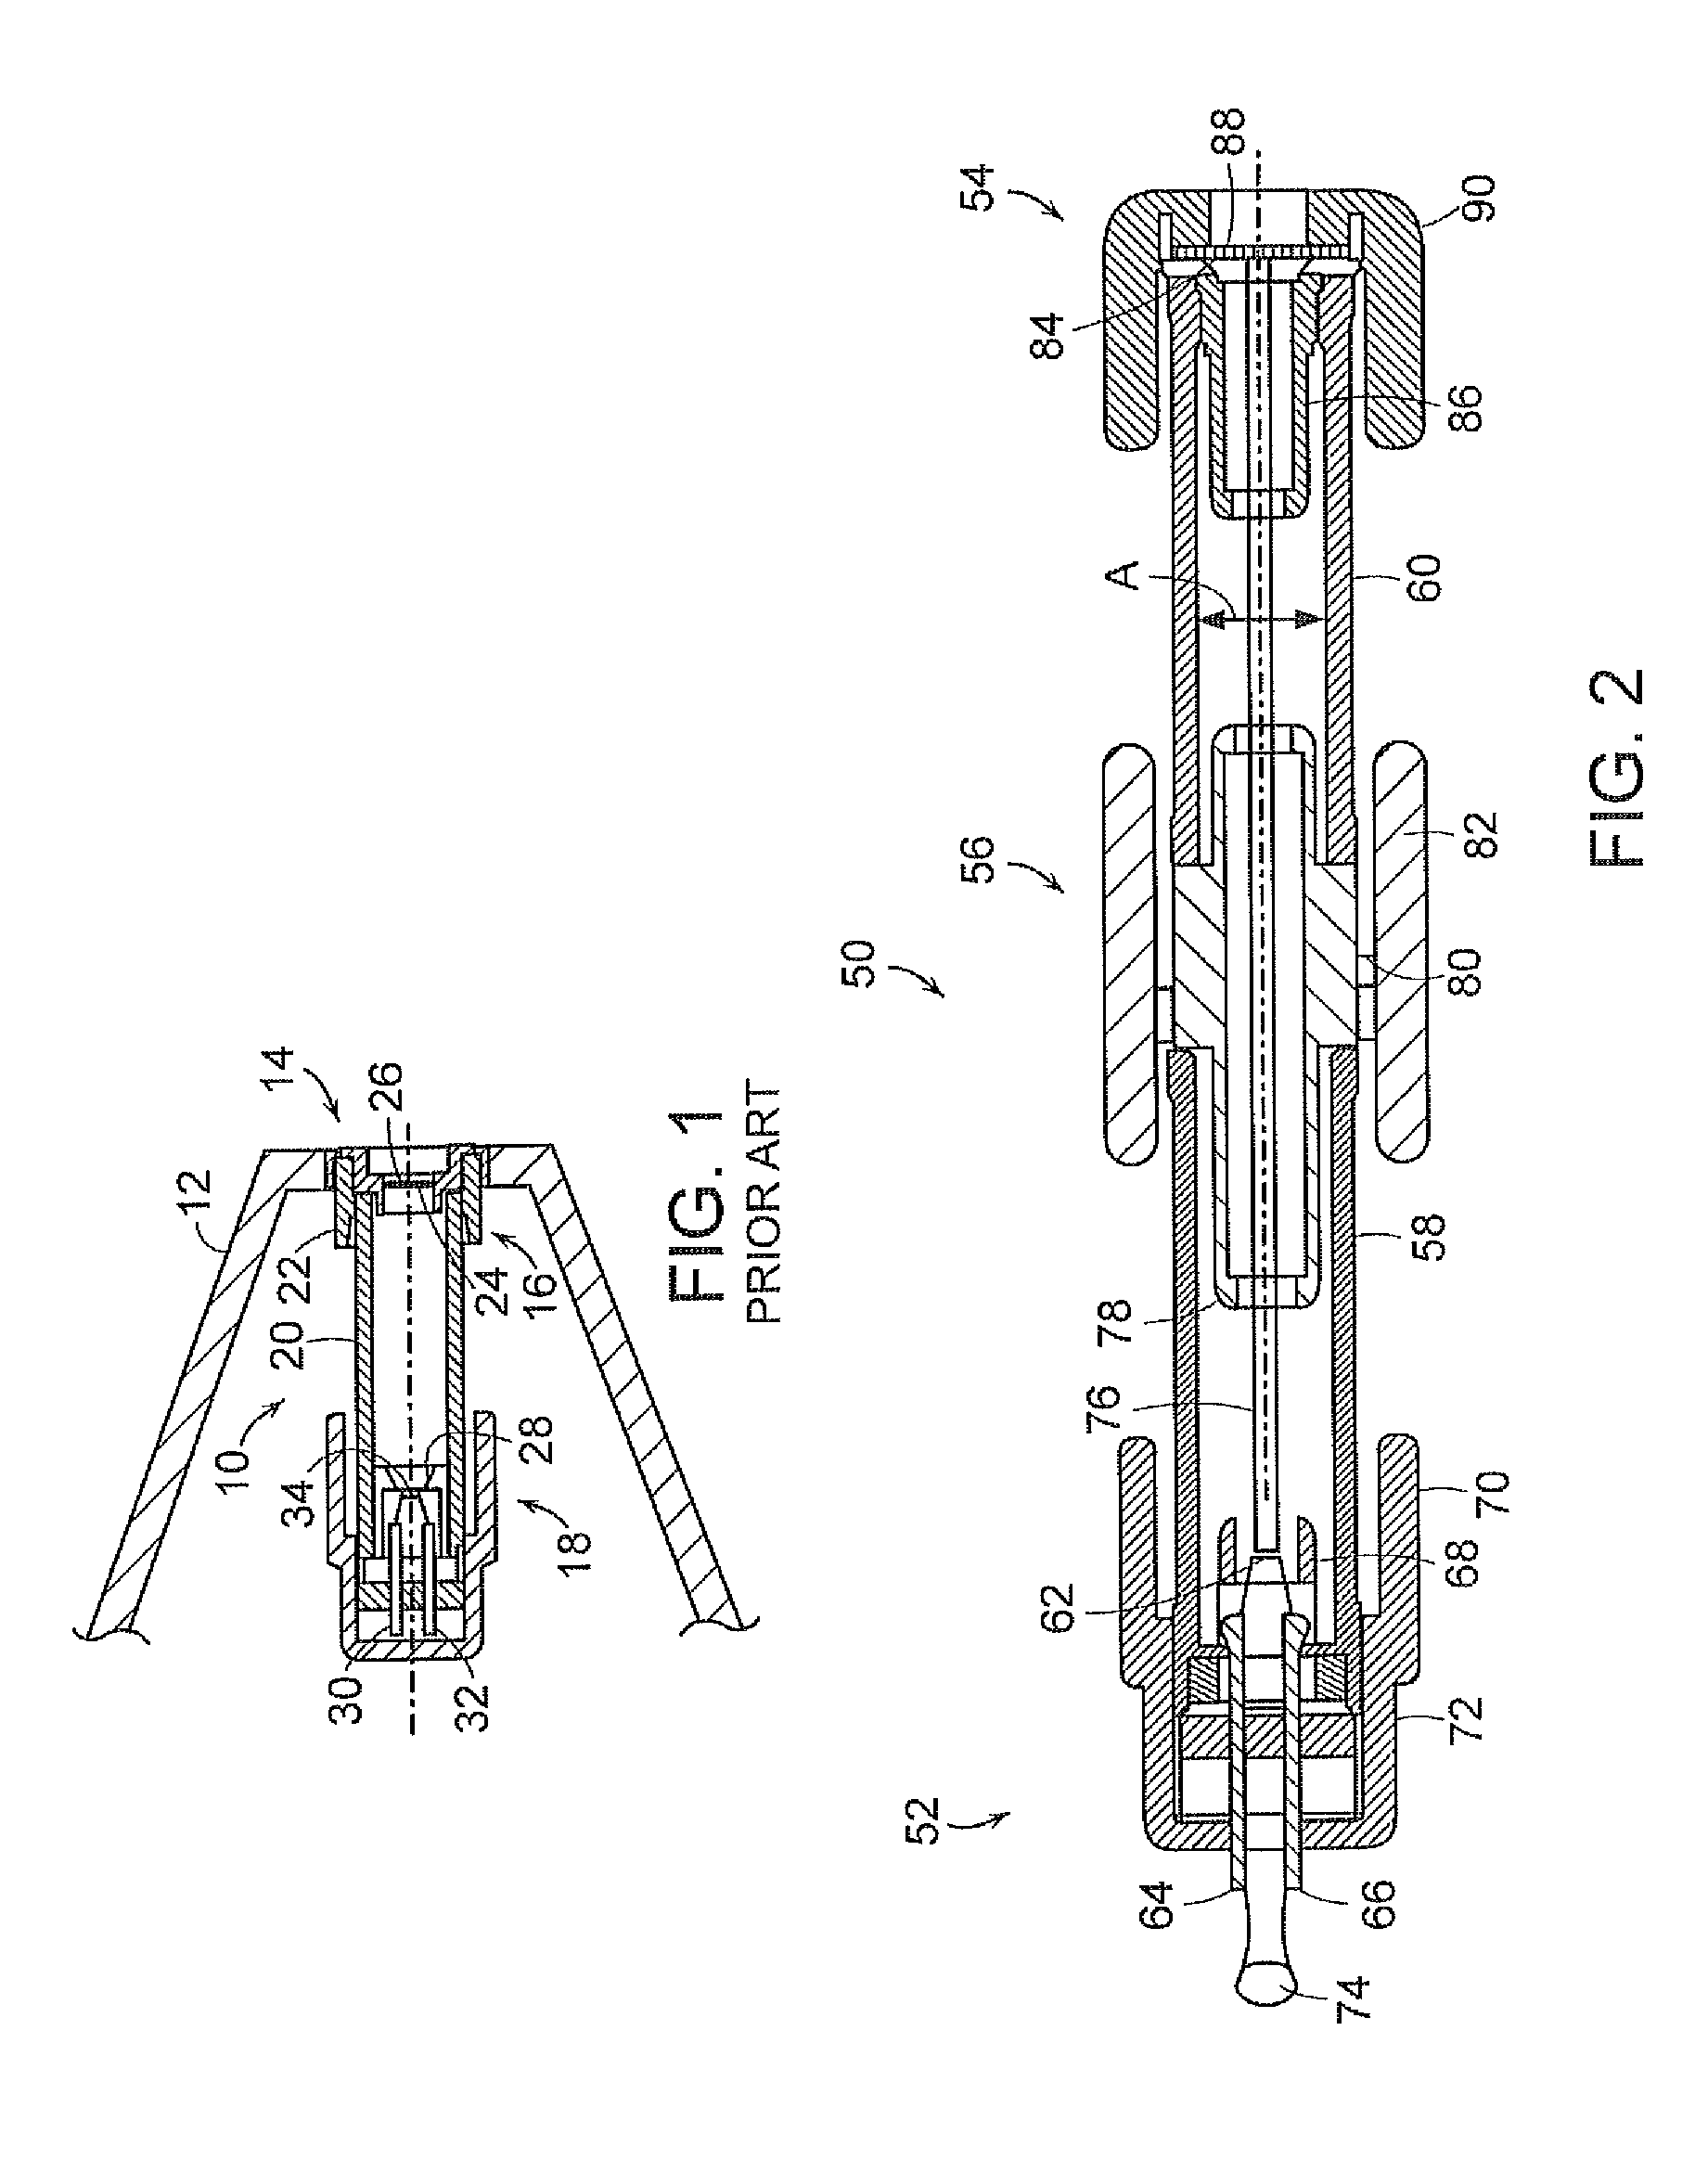 Compact high voltage X-ray source system and method for X-ray inspection applications